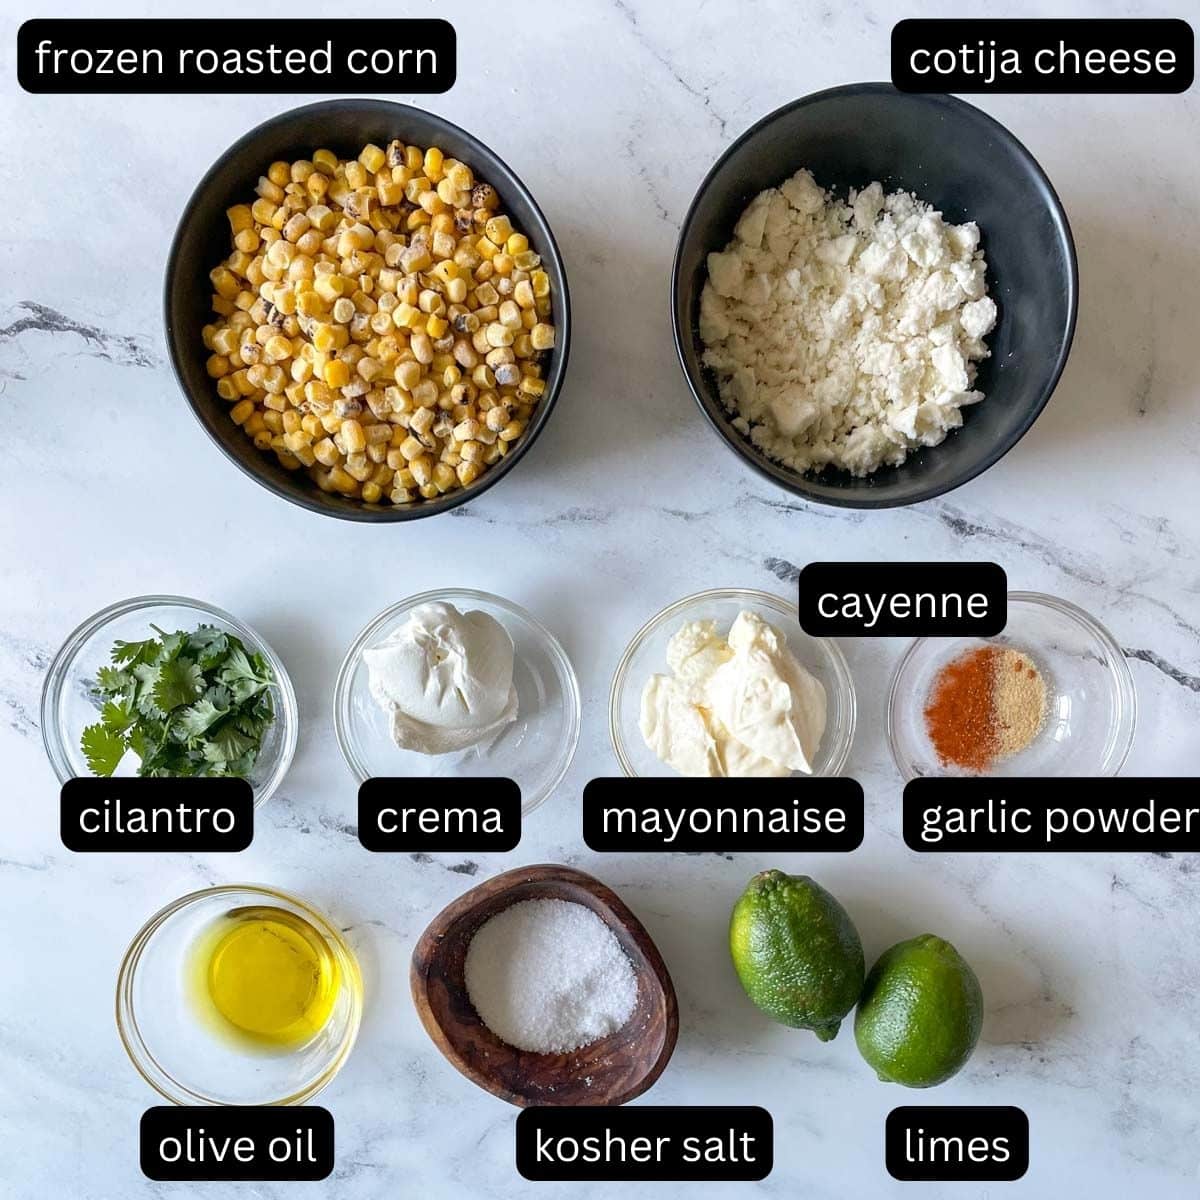 The labeled ingredients for esquites sit on a white marble counter.